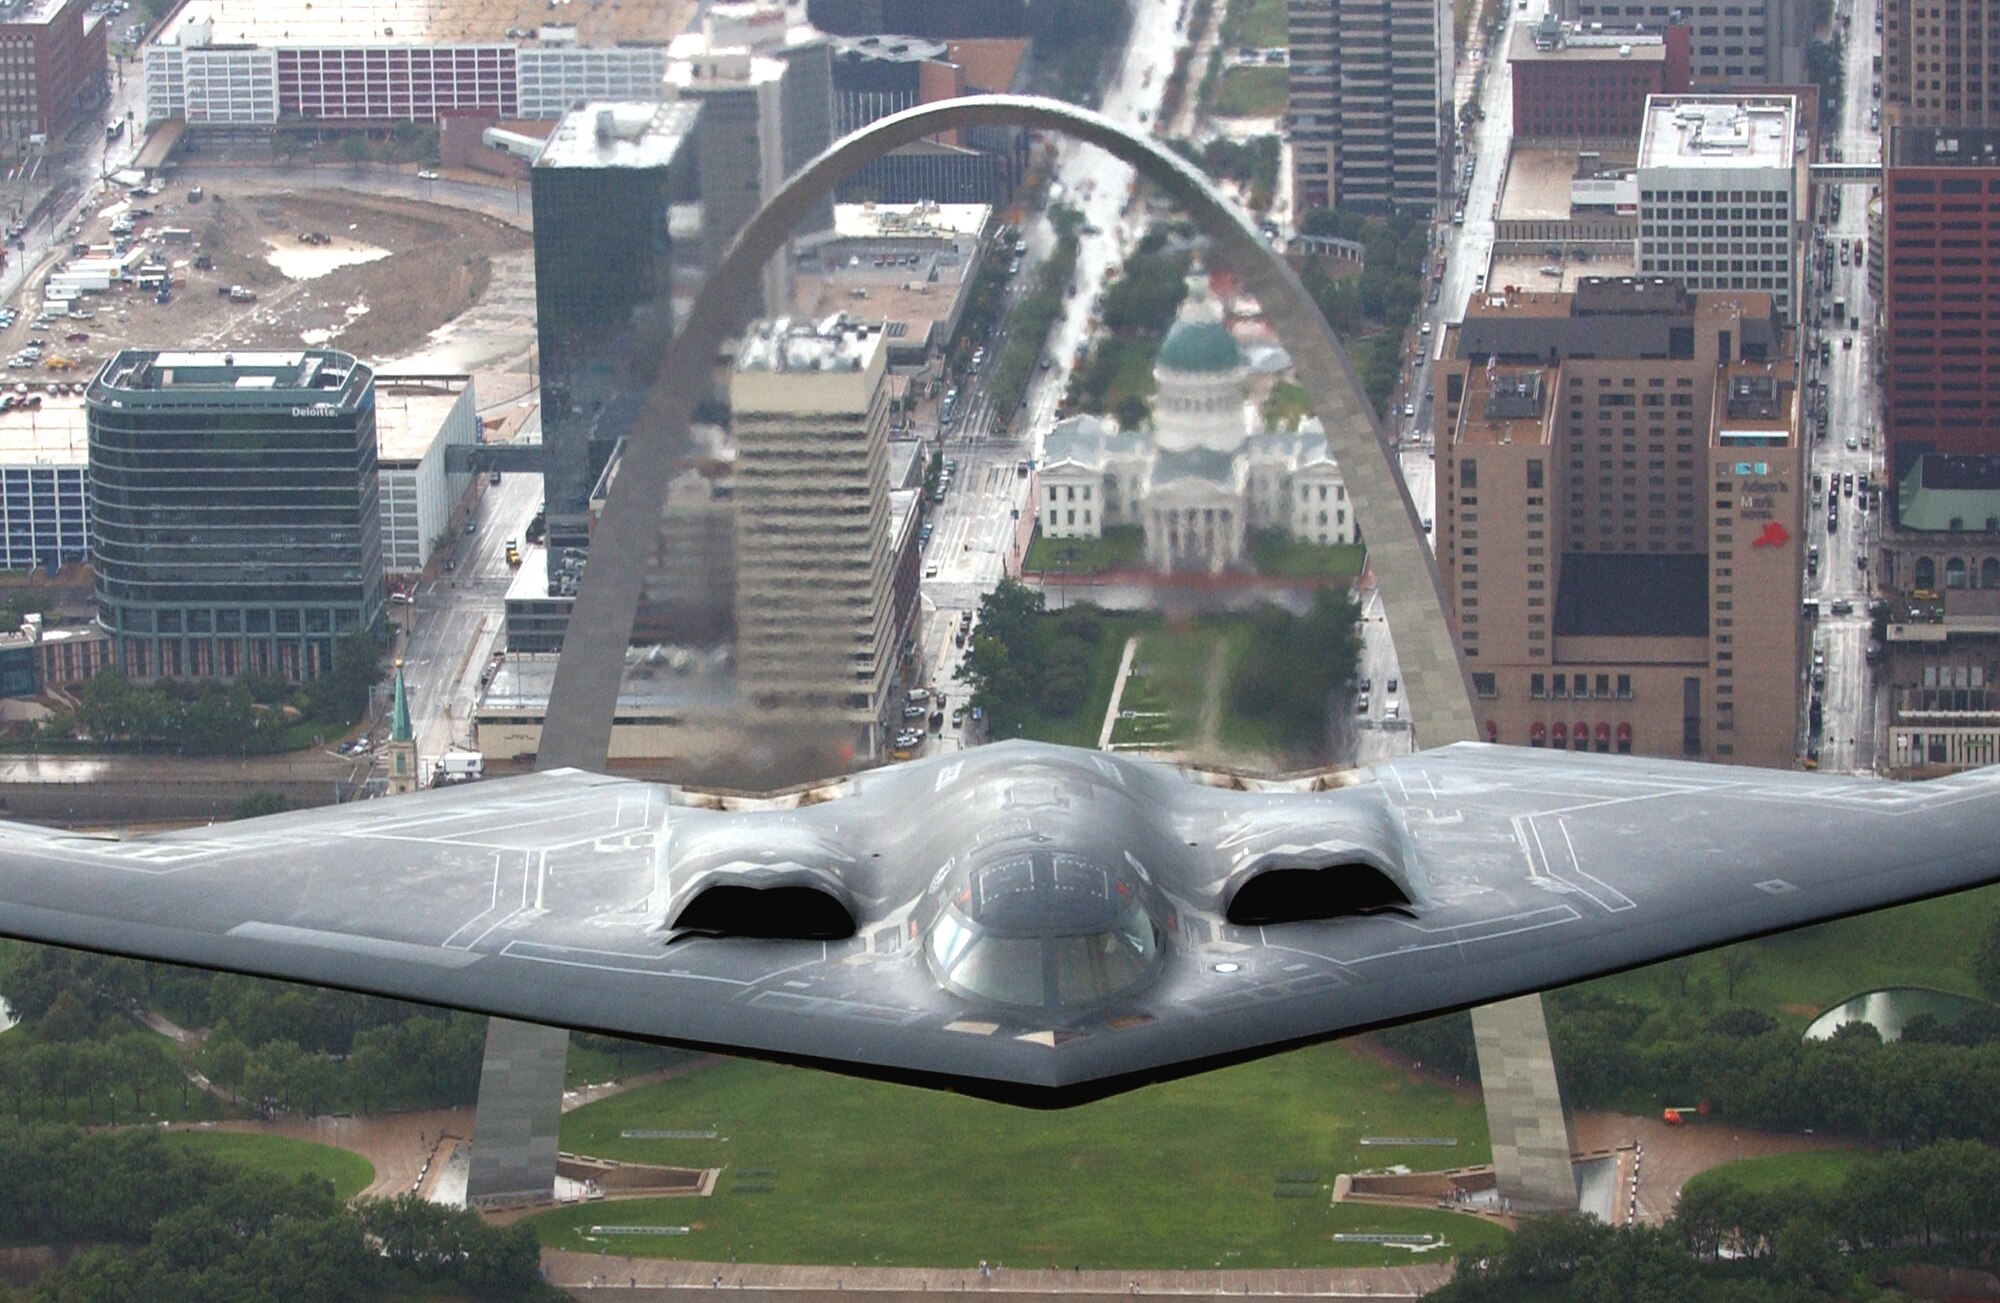 A B-2 Spirit flies over the St. Louis Arch on Aug. 10 during Air Force Week. The aircraft is with the 509th Bomb Wing at Whiteman Air Force Base, Mo.(U.S. Air Force photo/Tech. Sgt. Justin D. Pyle)